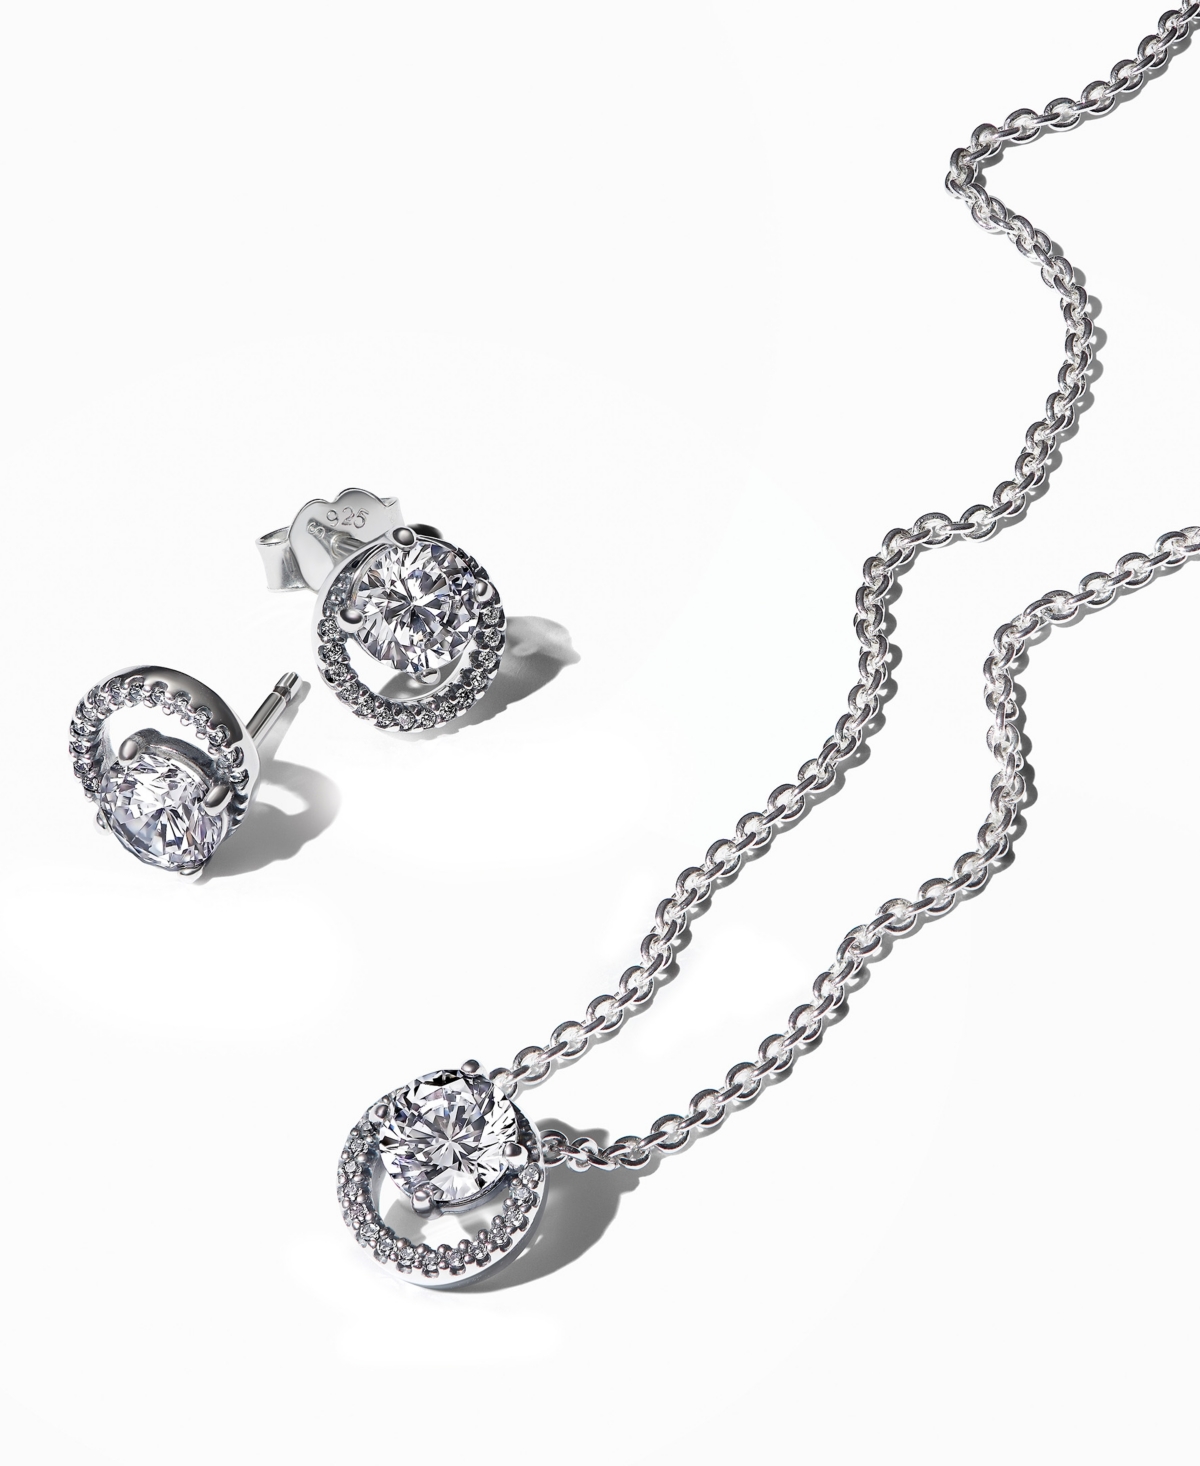 Sparkling Round Cubic Zirconia Stone Necklace and Heart Earring Gift Set - Silver